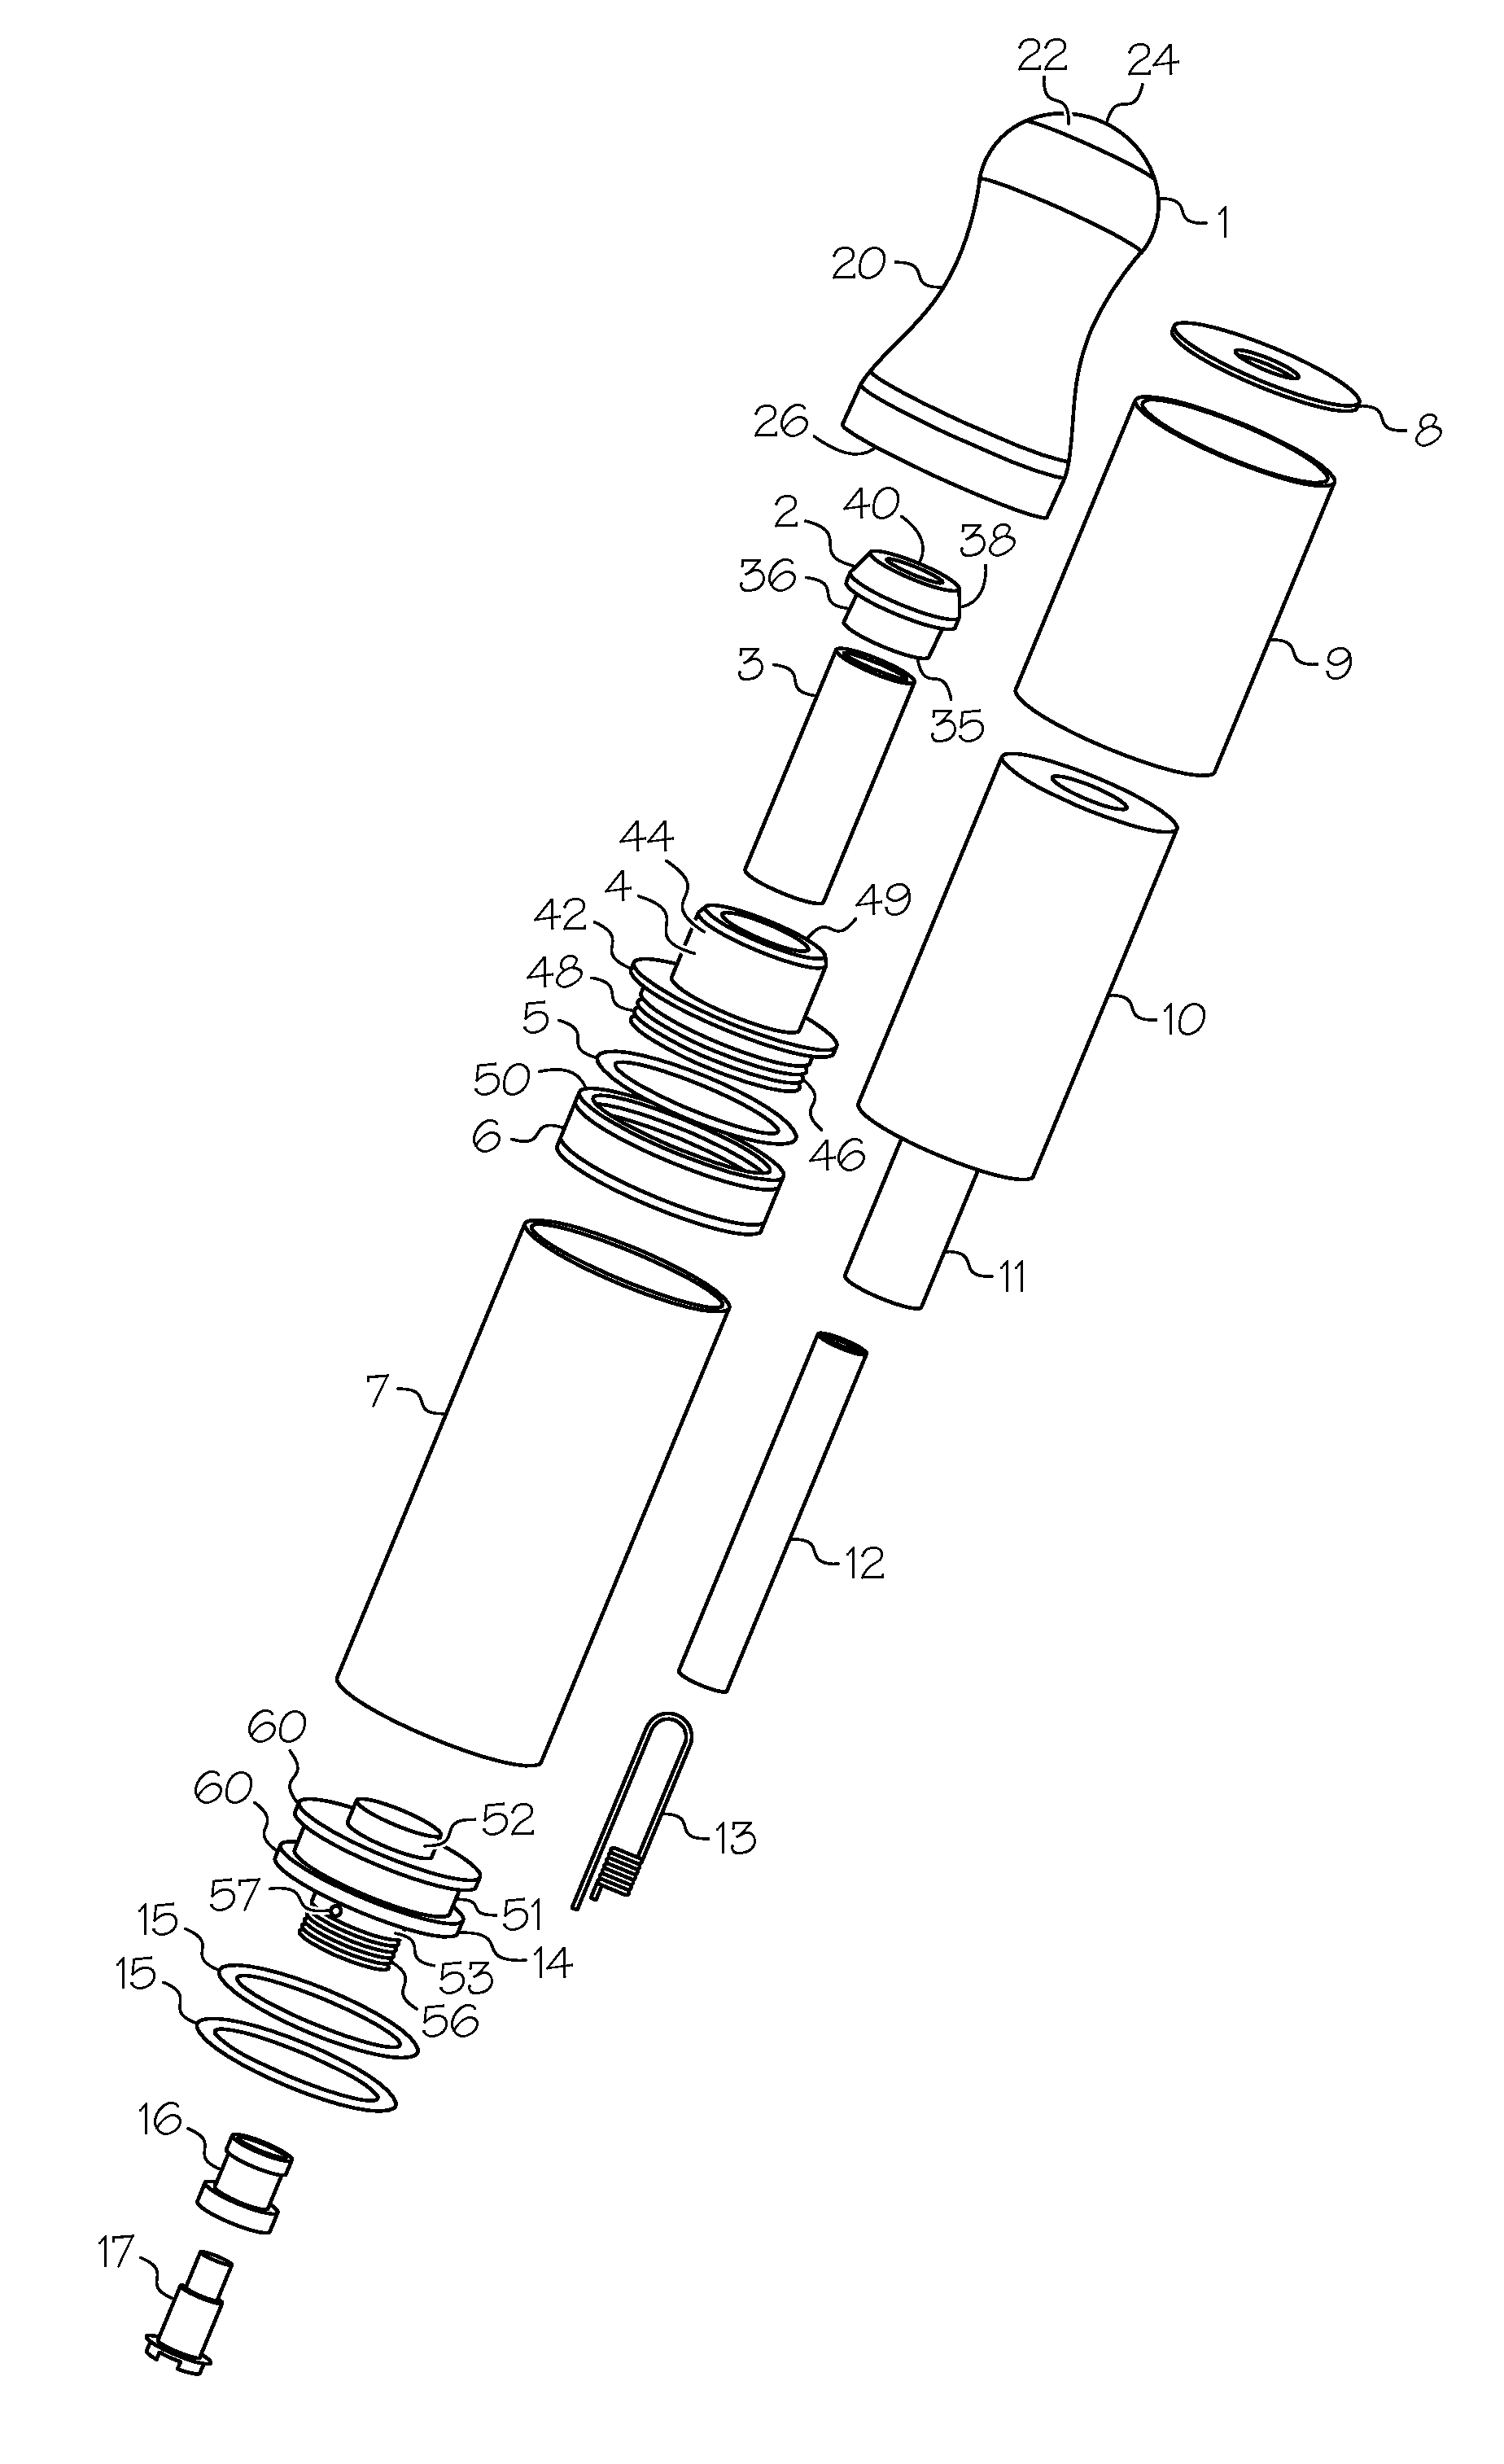 Mouthpiece assembly for an electronic cigar or cigarette